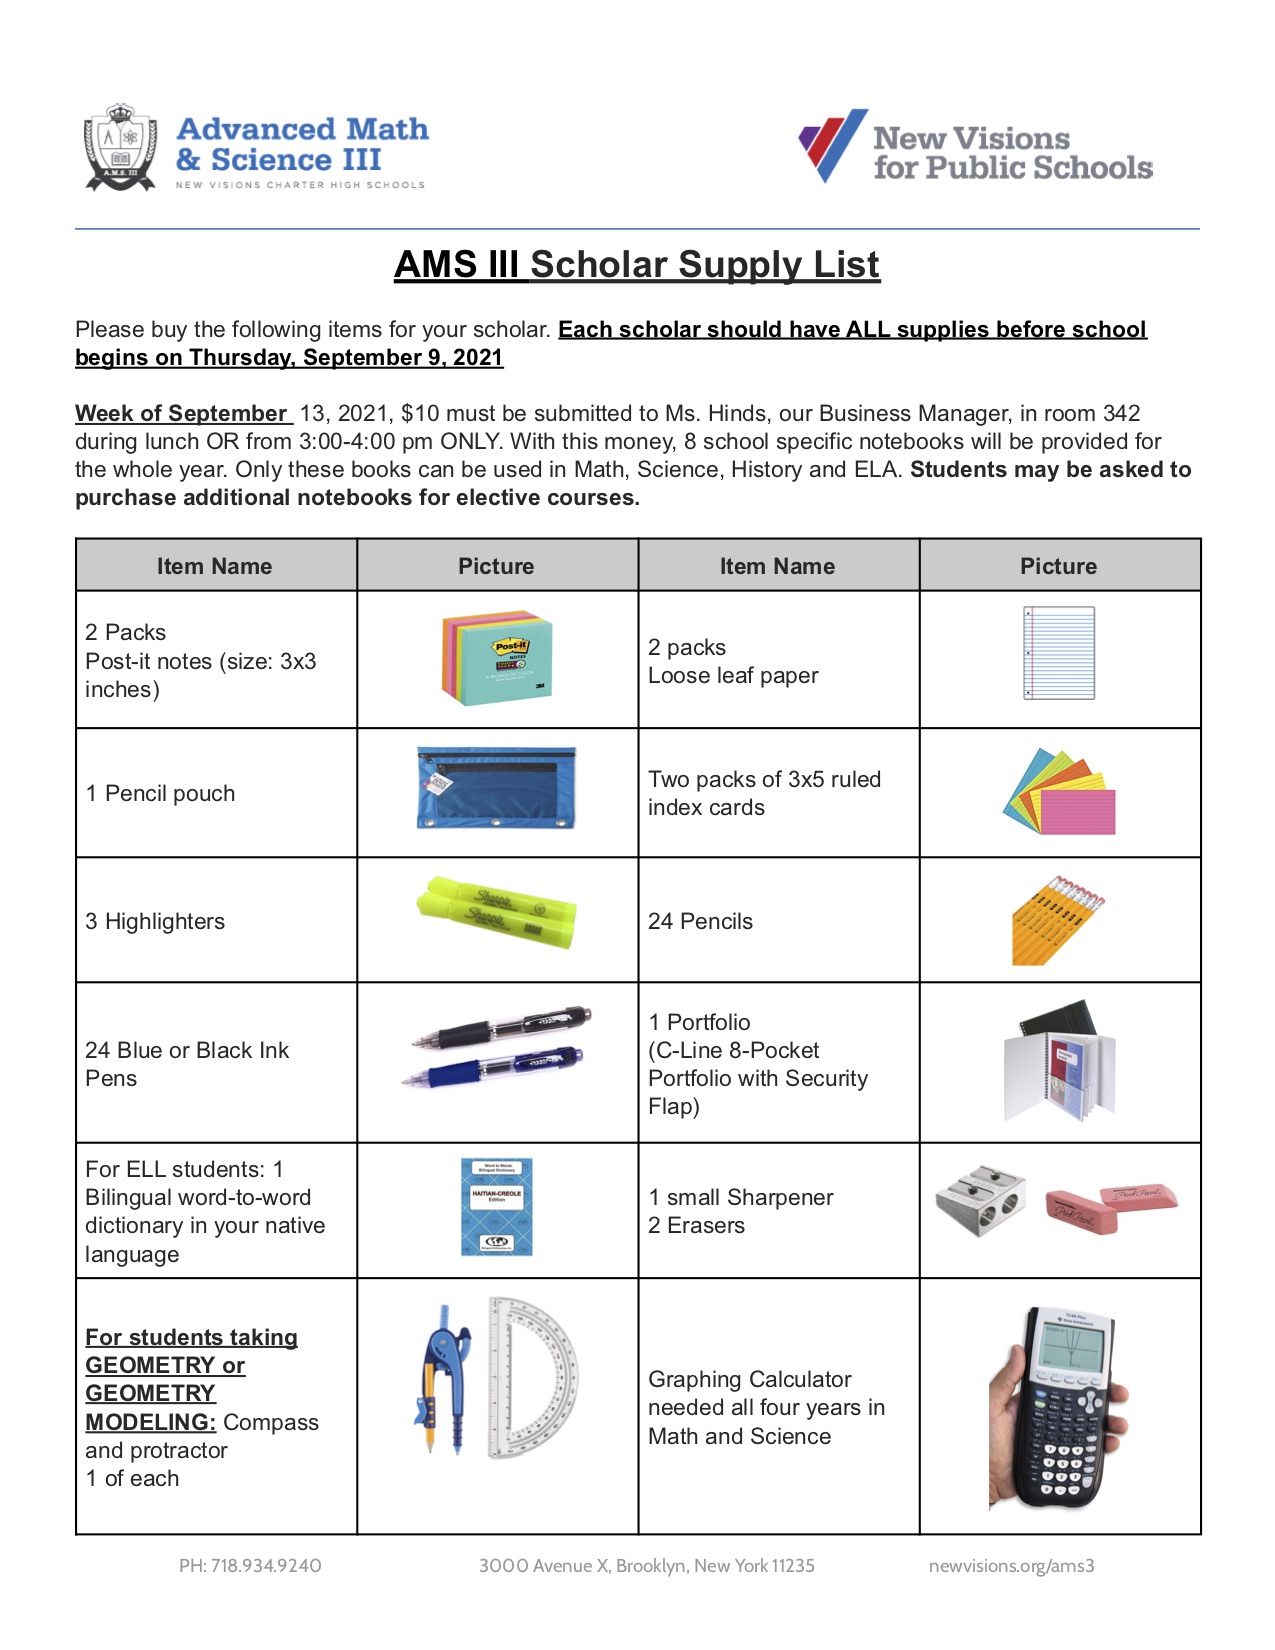 https://www.newvisions.org/page/-/AMS_III_Scholar_Supply_List.jpg